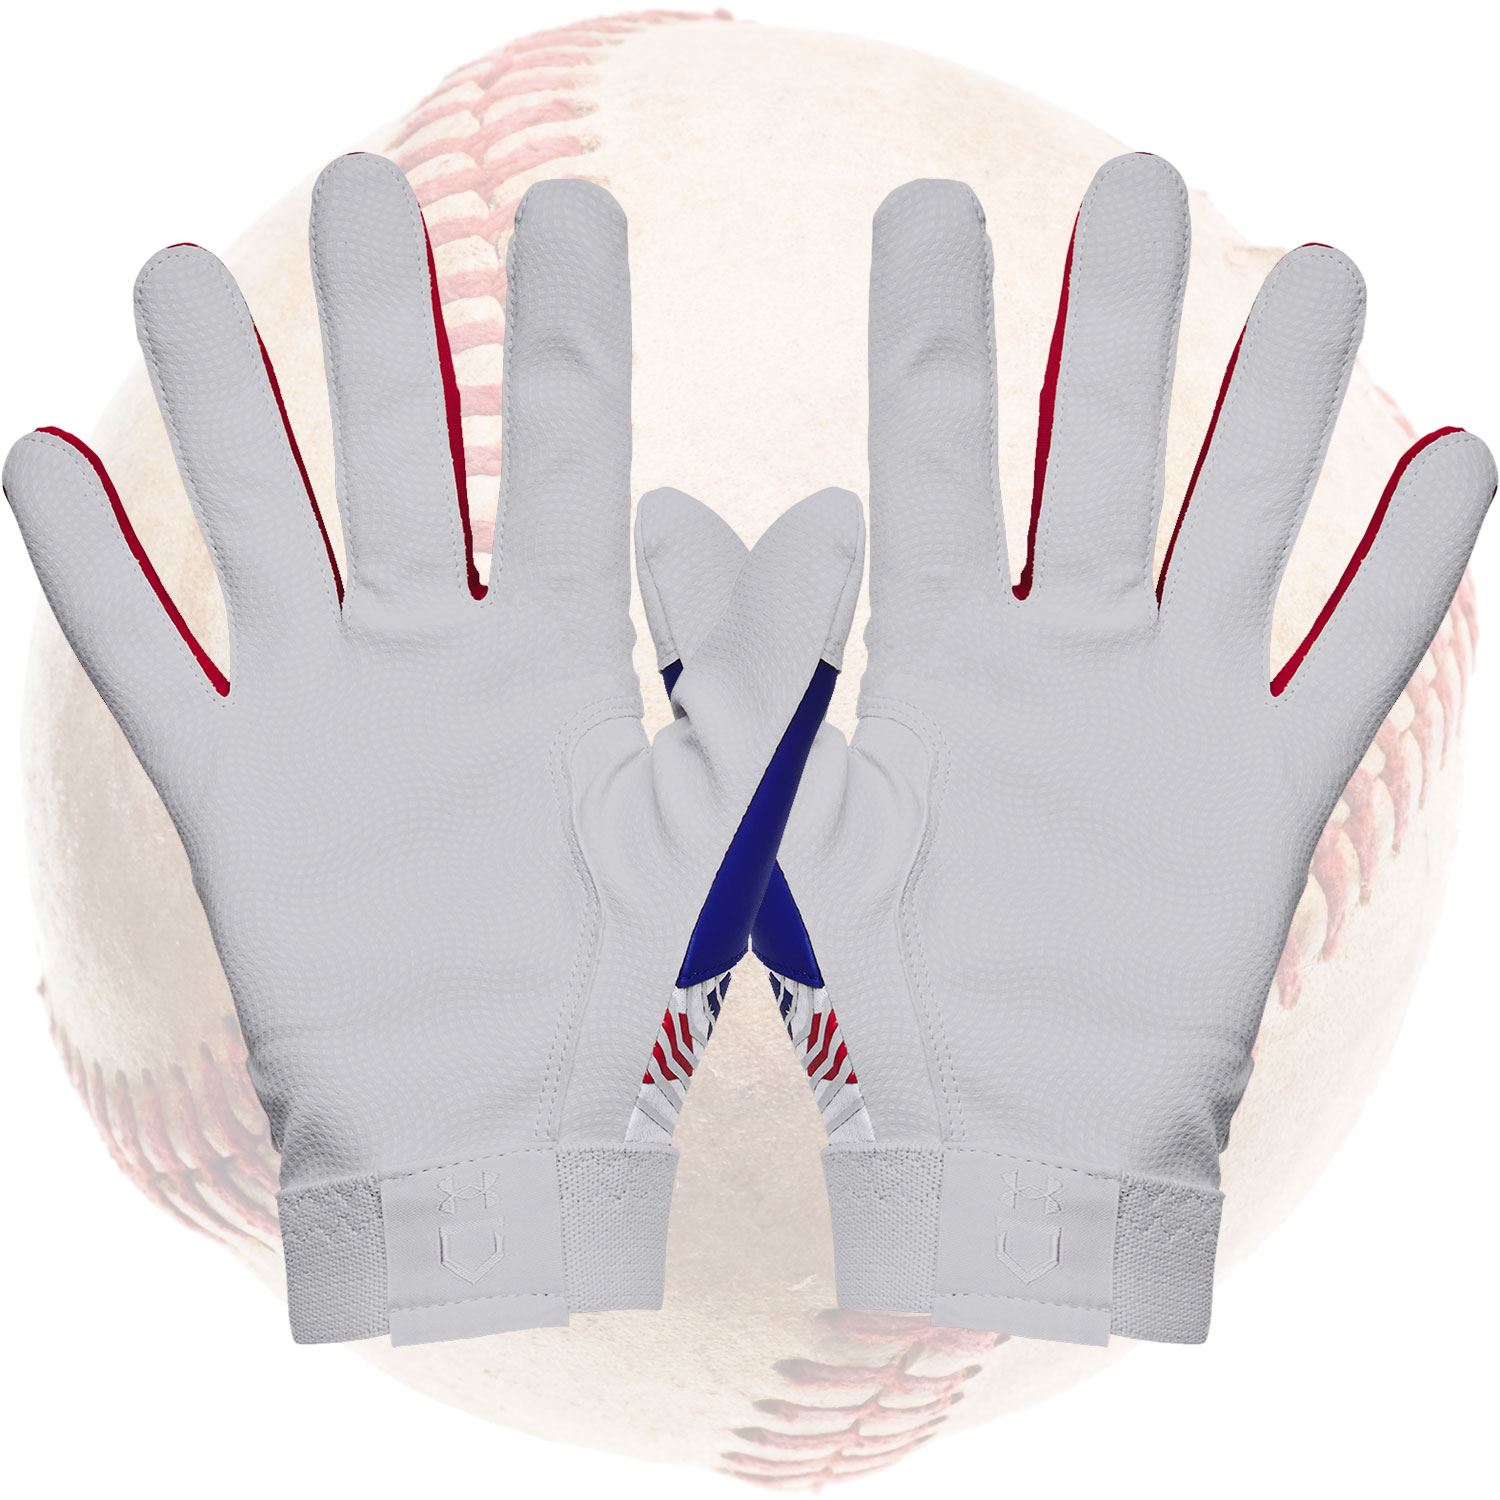 Under Armour Clean Up Culture Baseball Batting Gloves - Performance Synthetic Grip